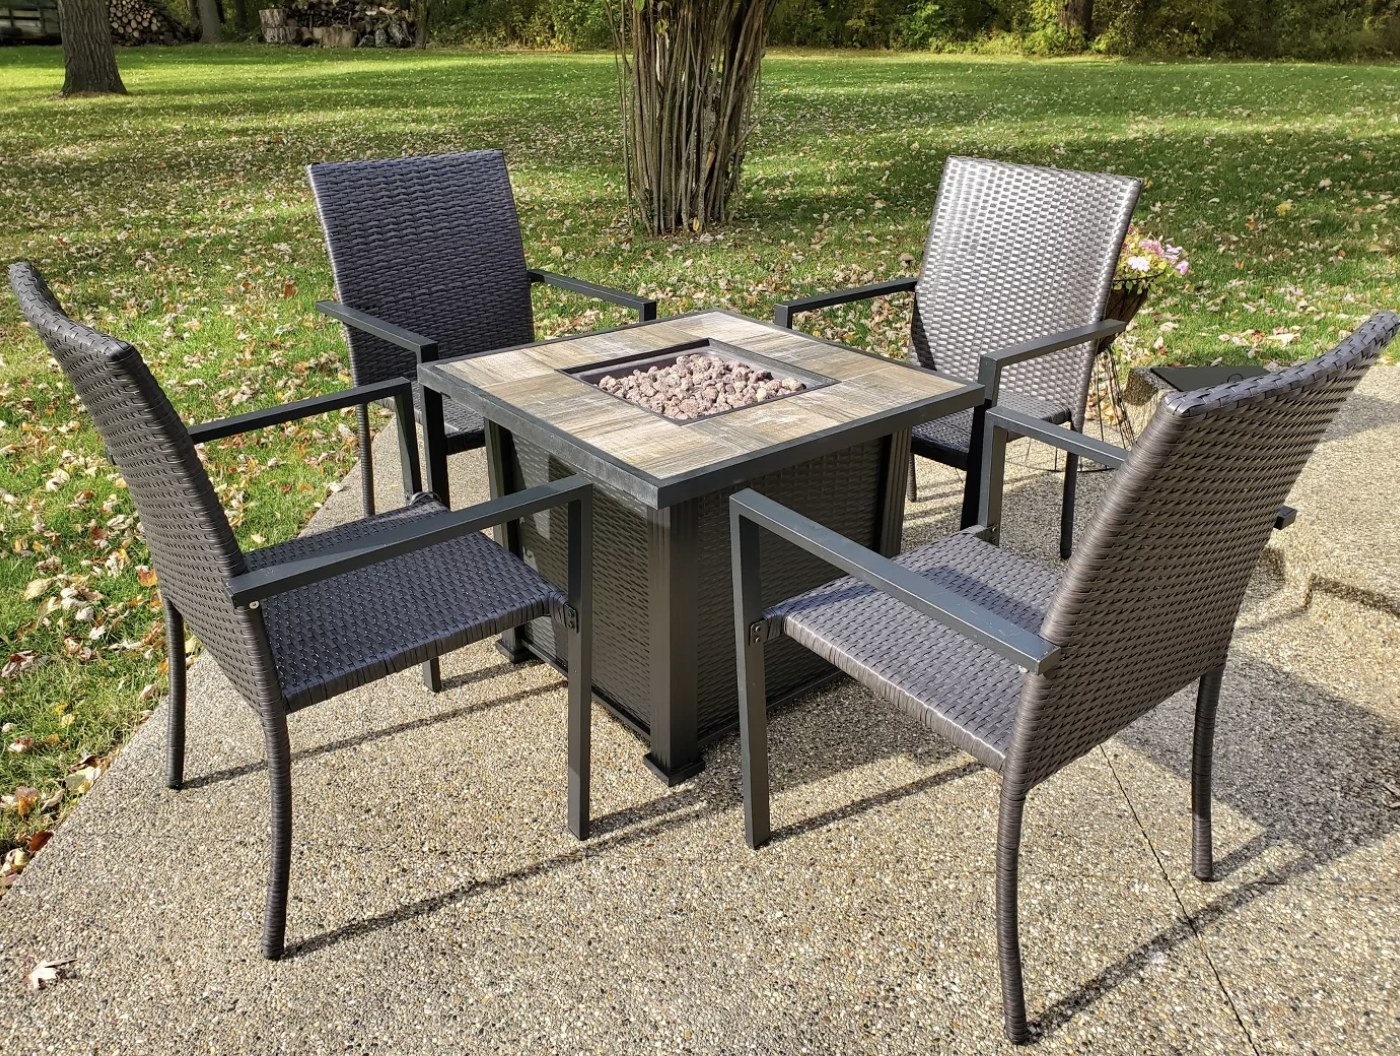 The fire pit with four chairs